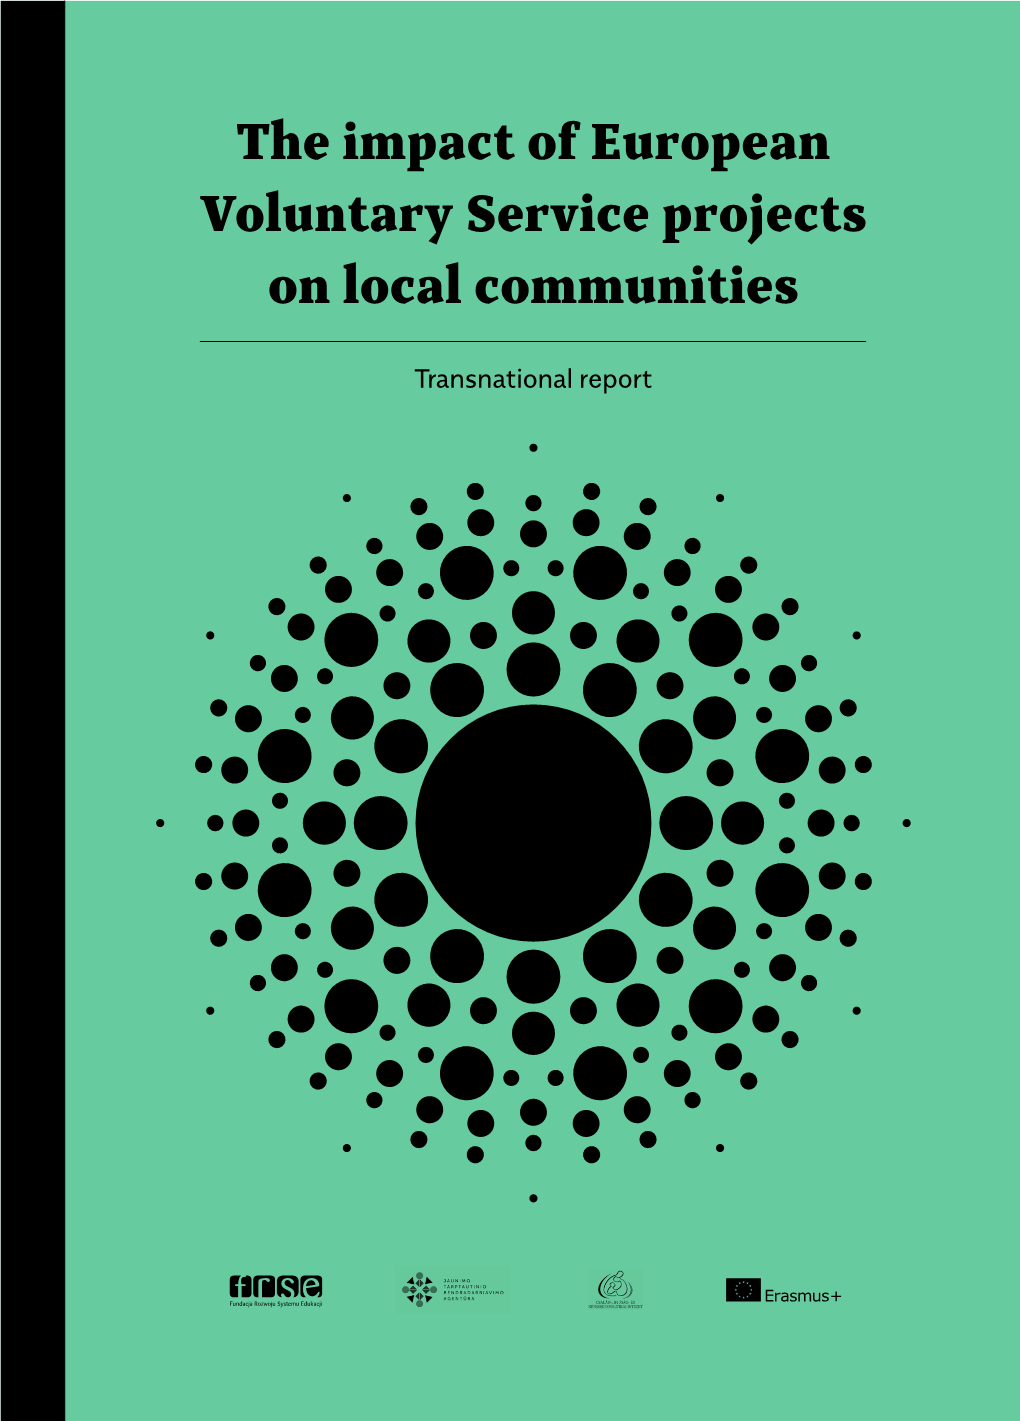 The Impact of European Voluntary Service Projects on Local Communities